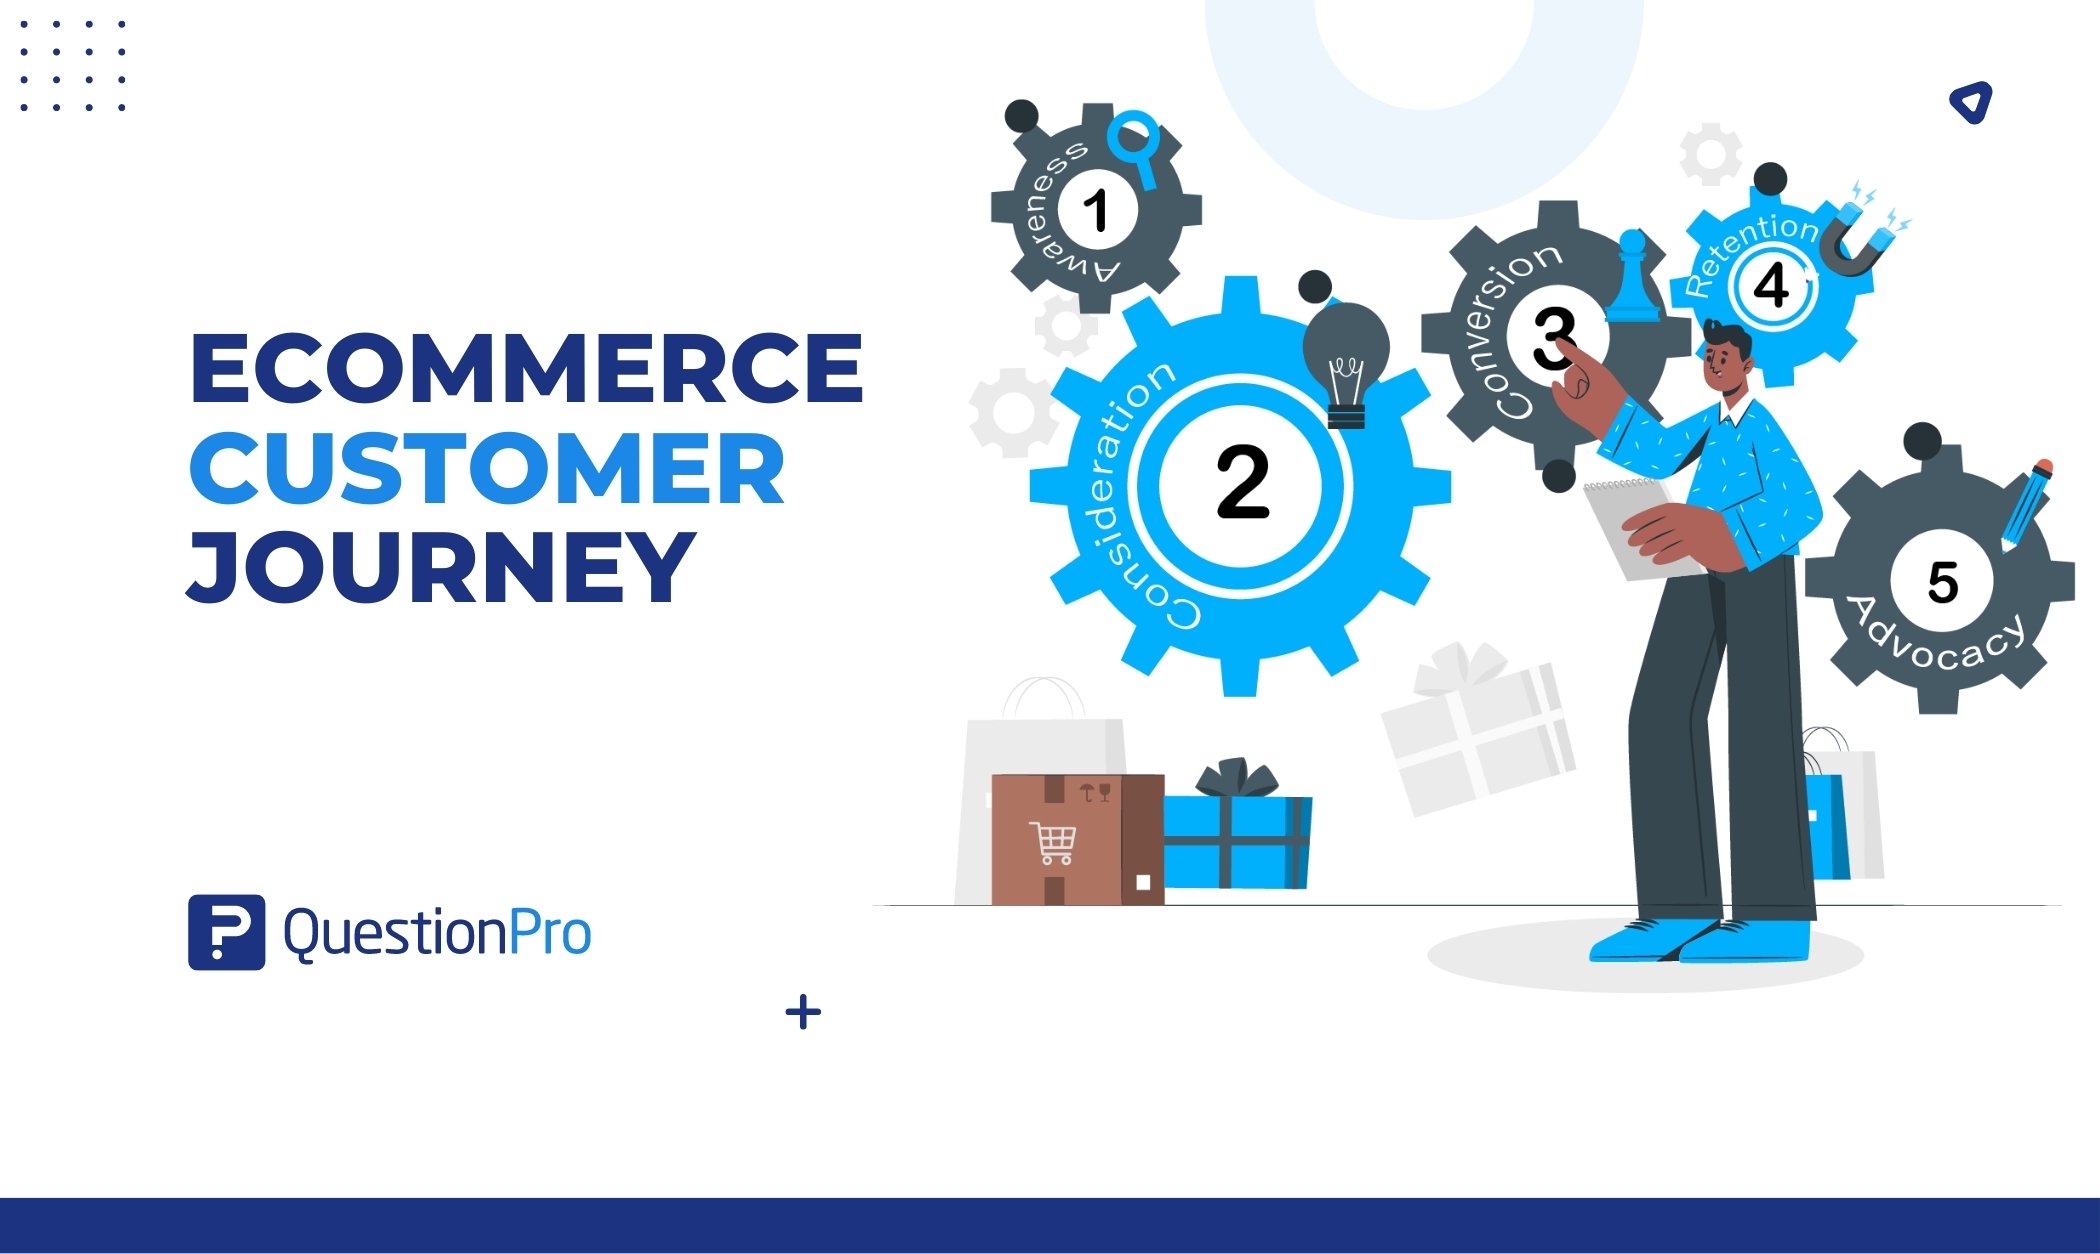 E-commerce Customer Journey: Stages + How to Improve